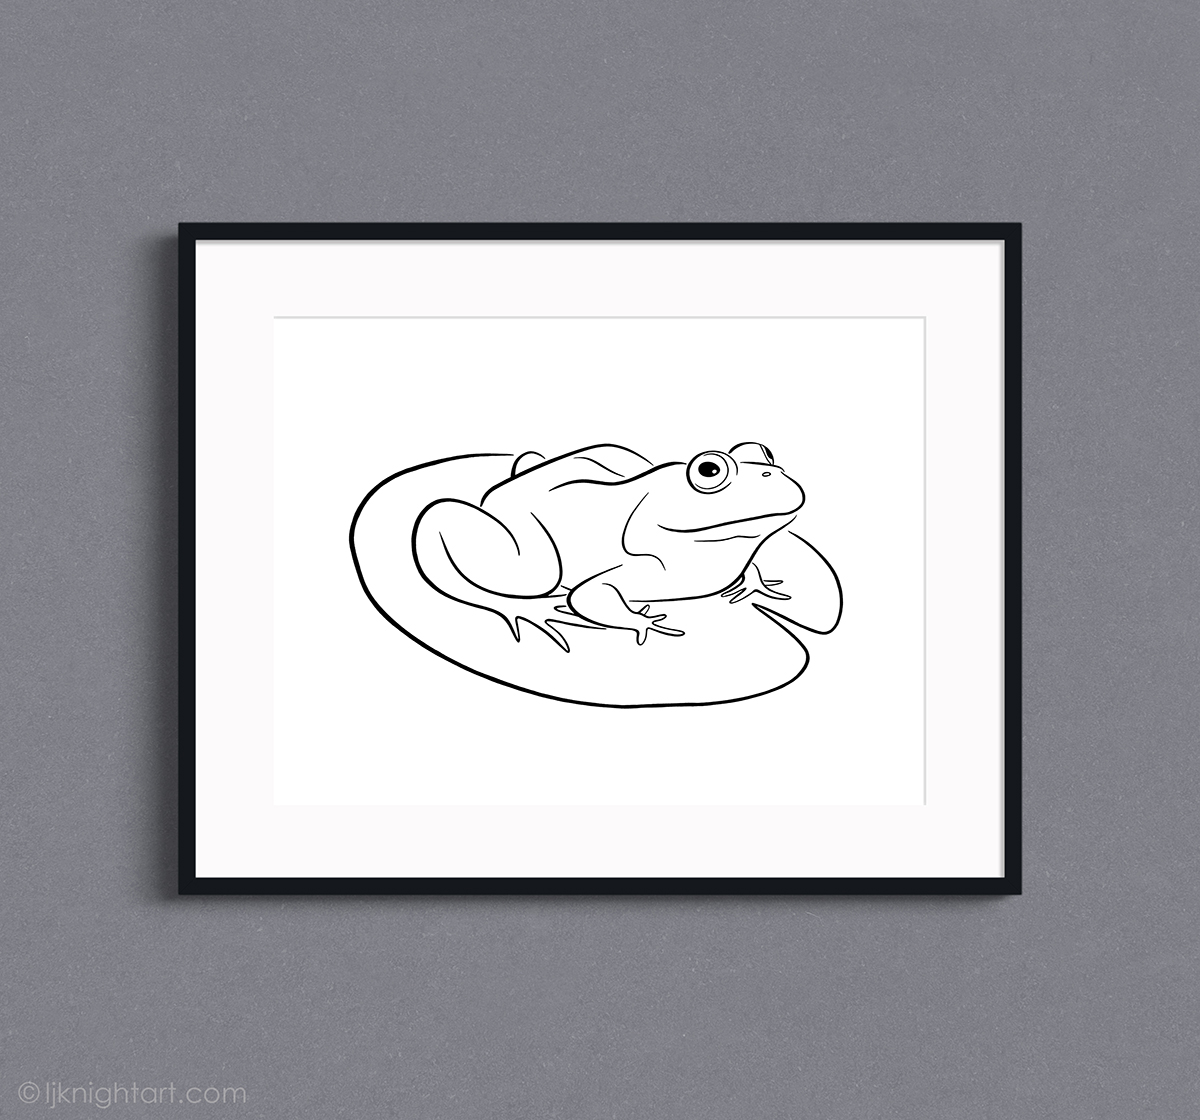 drawing of a frog on a lily pad